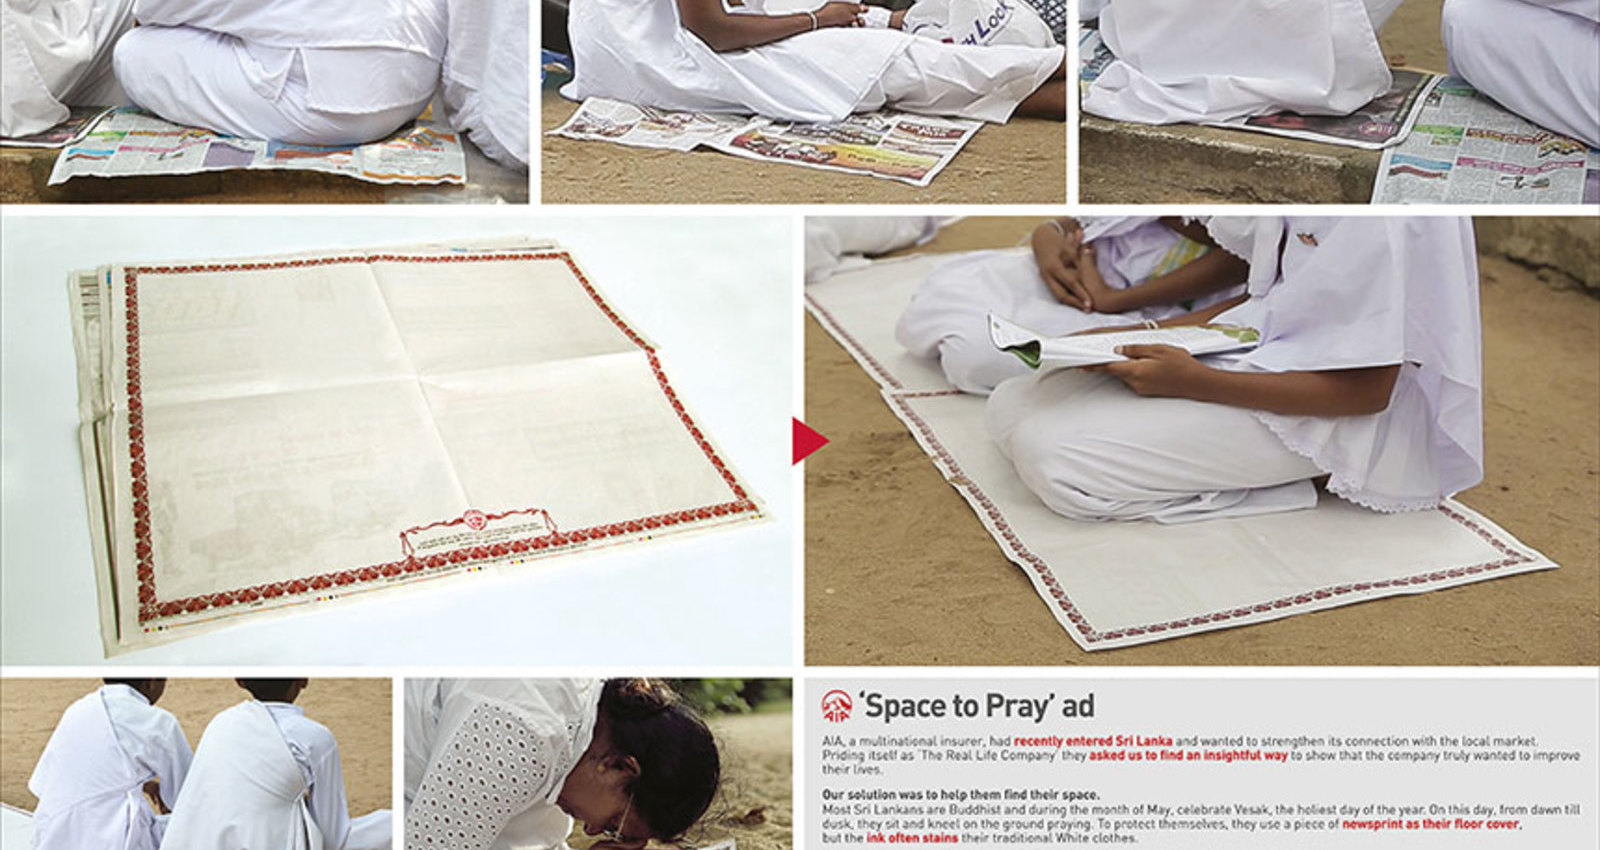 AIA SPACE TO PRAY AD